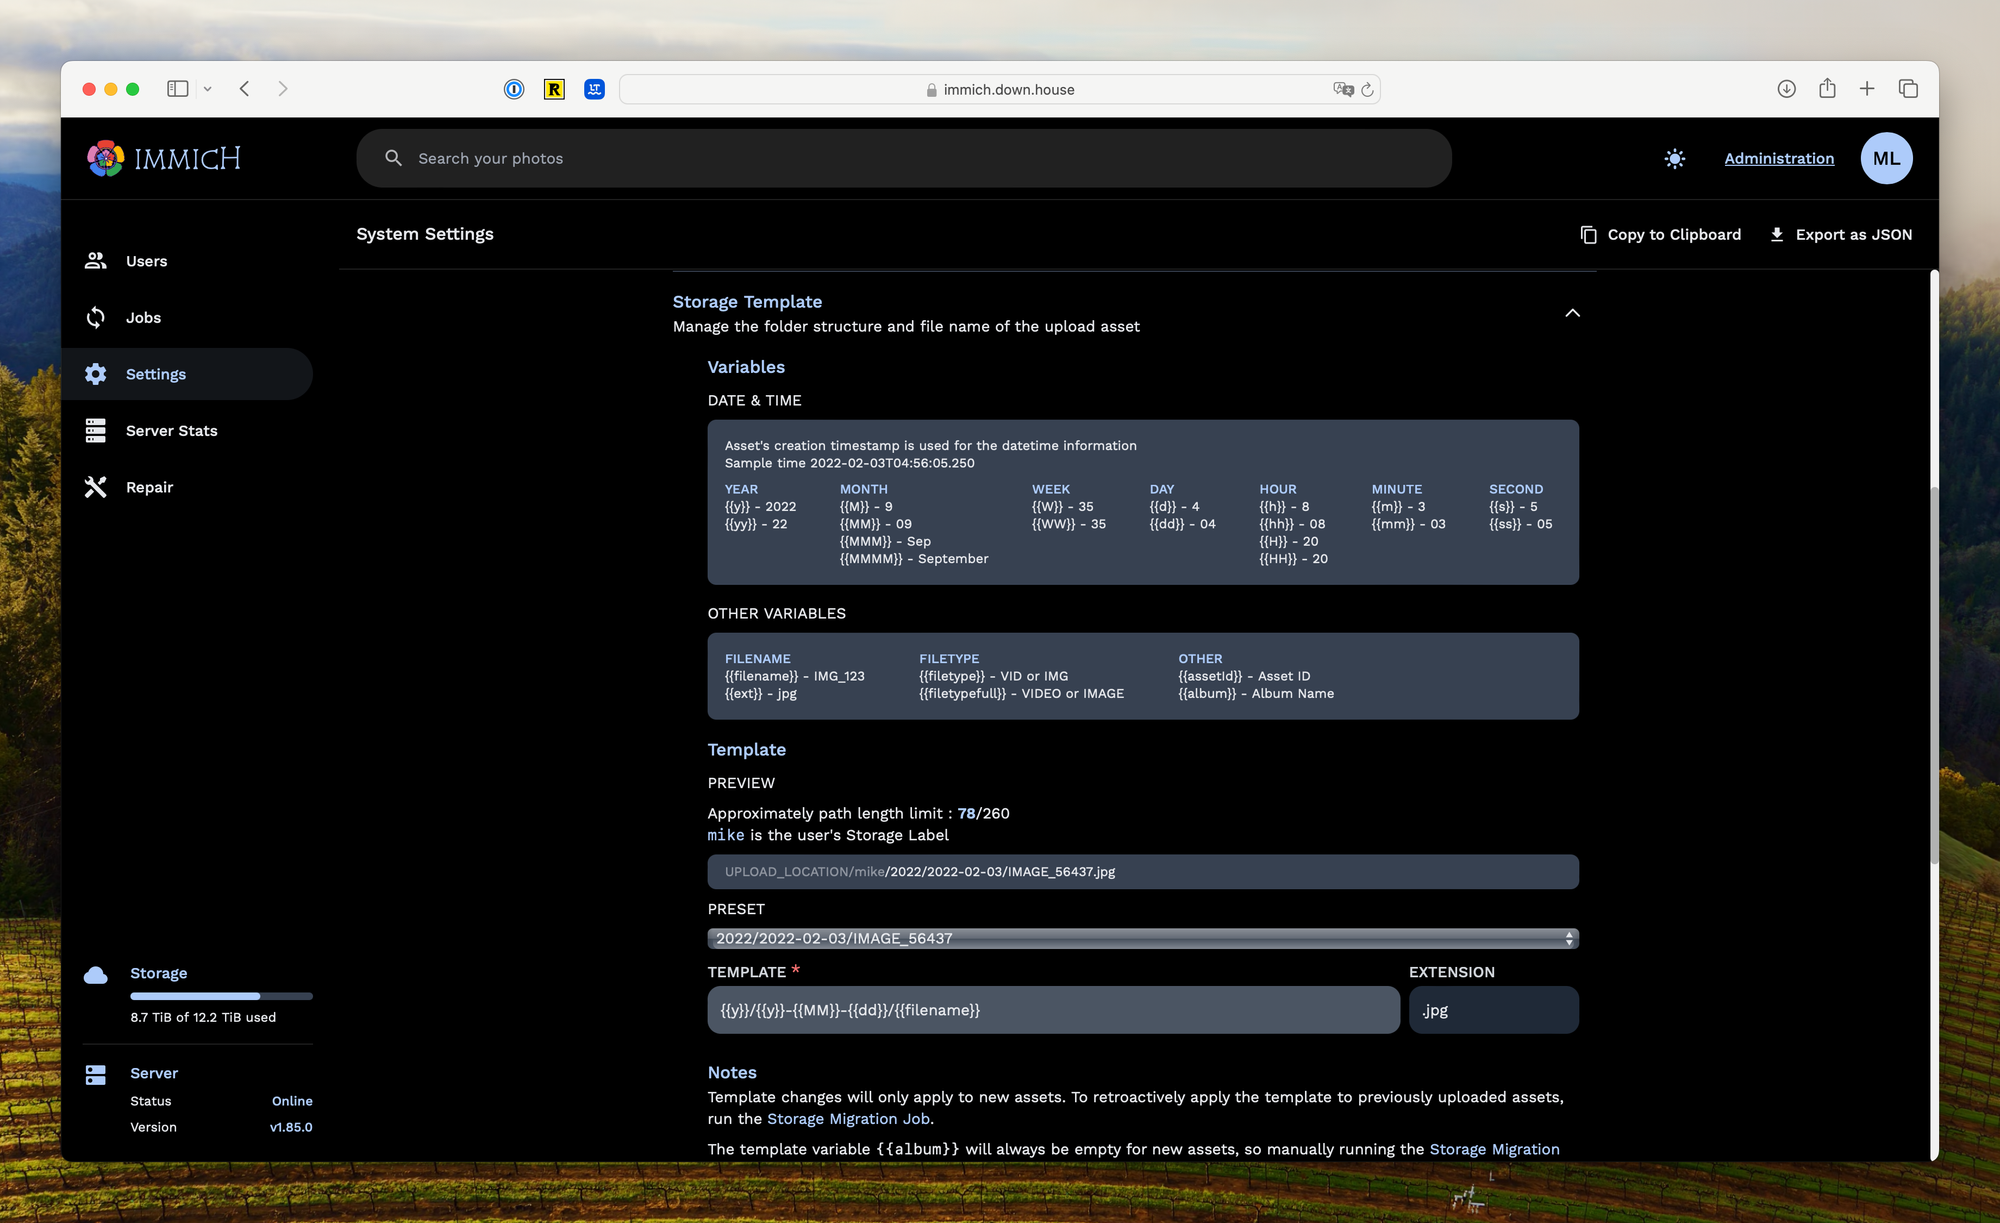 A screenshot of the admin panel in Immich